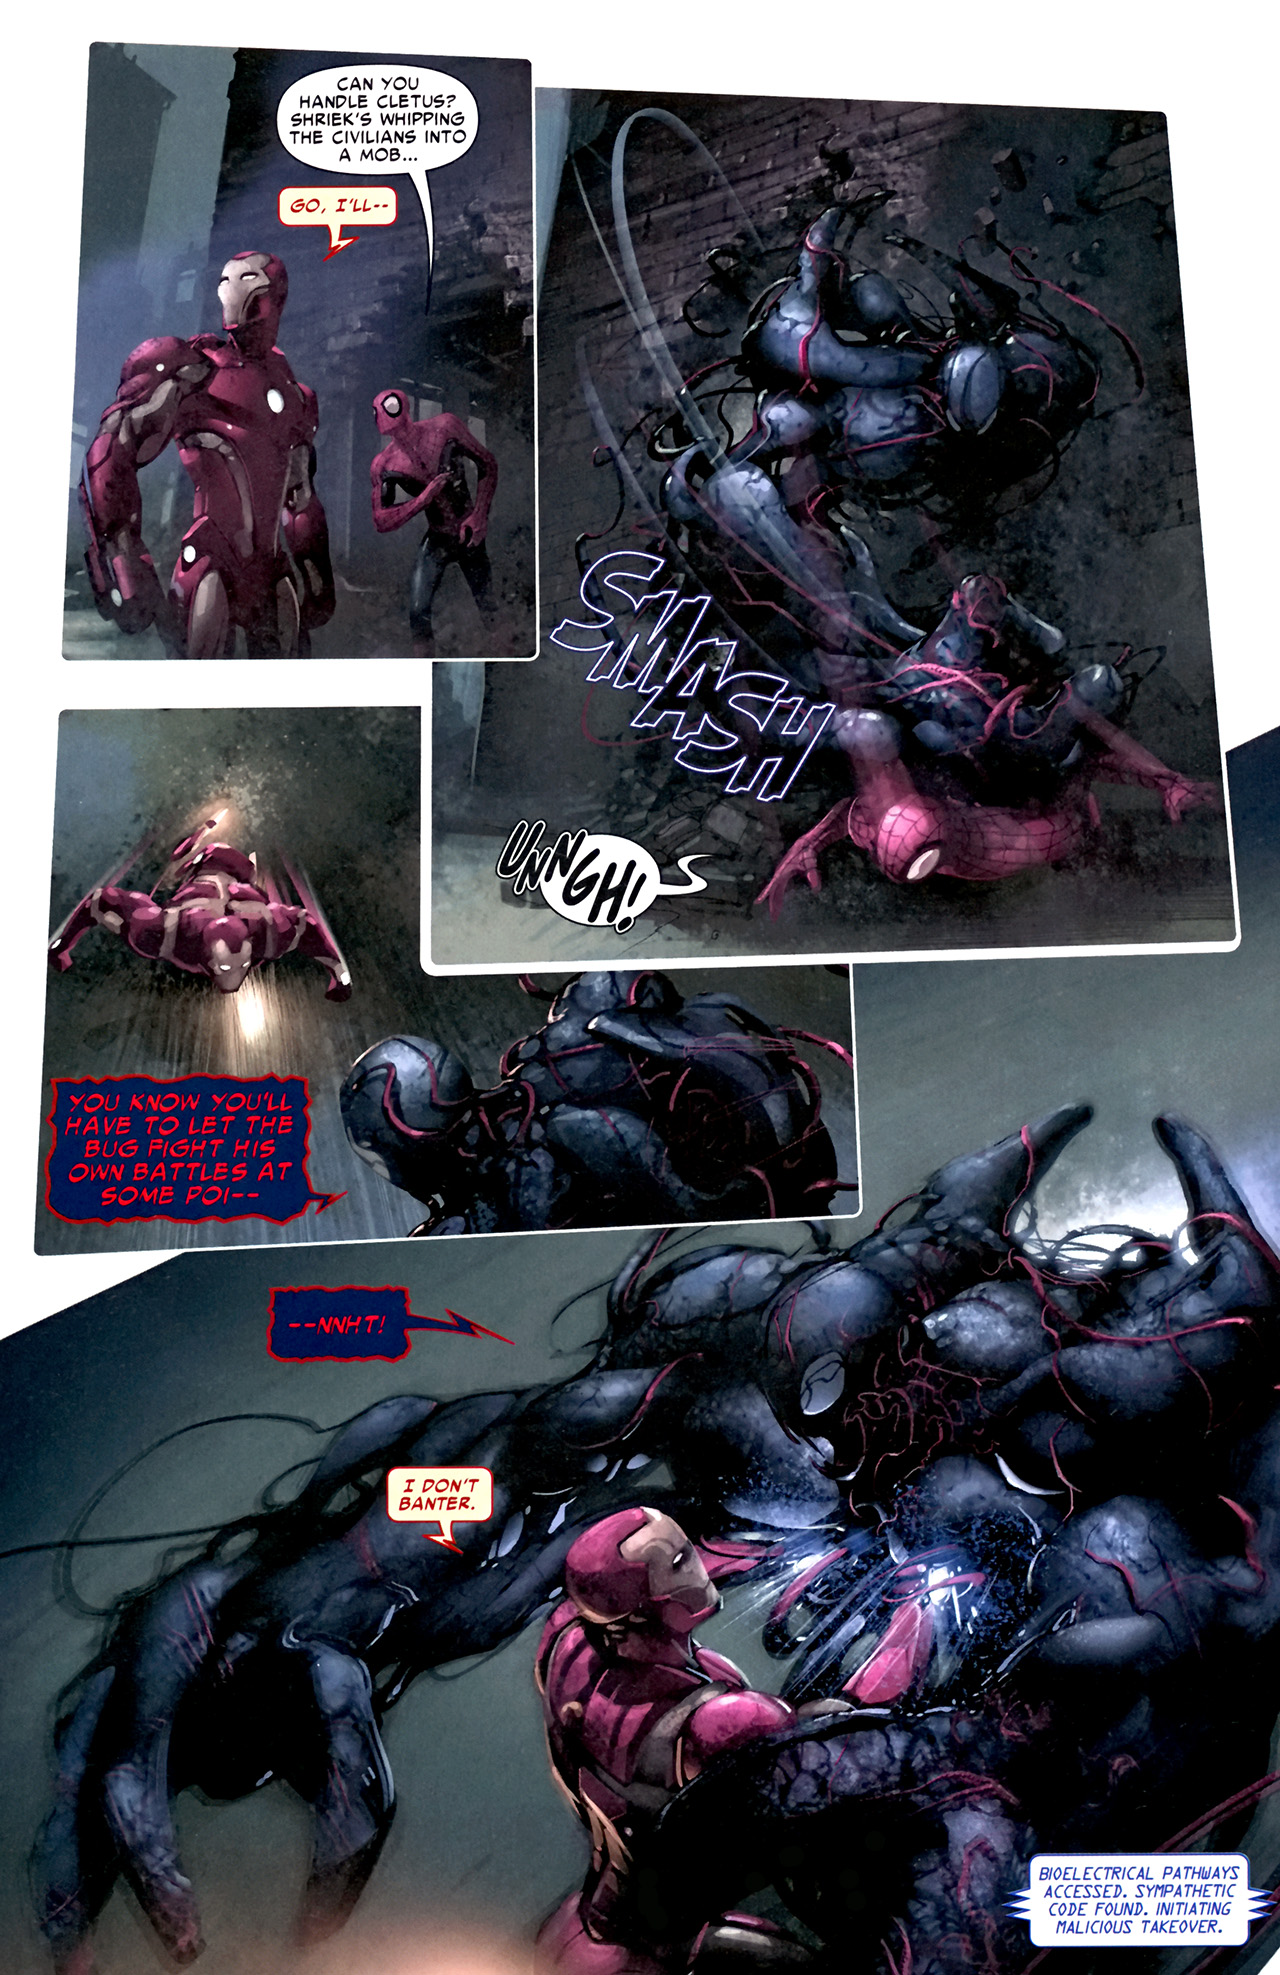 Carnage 5 of 5